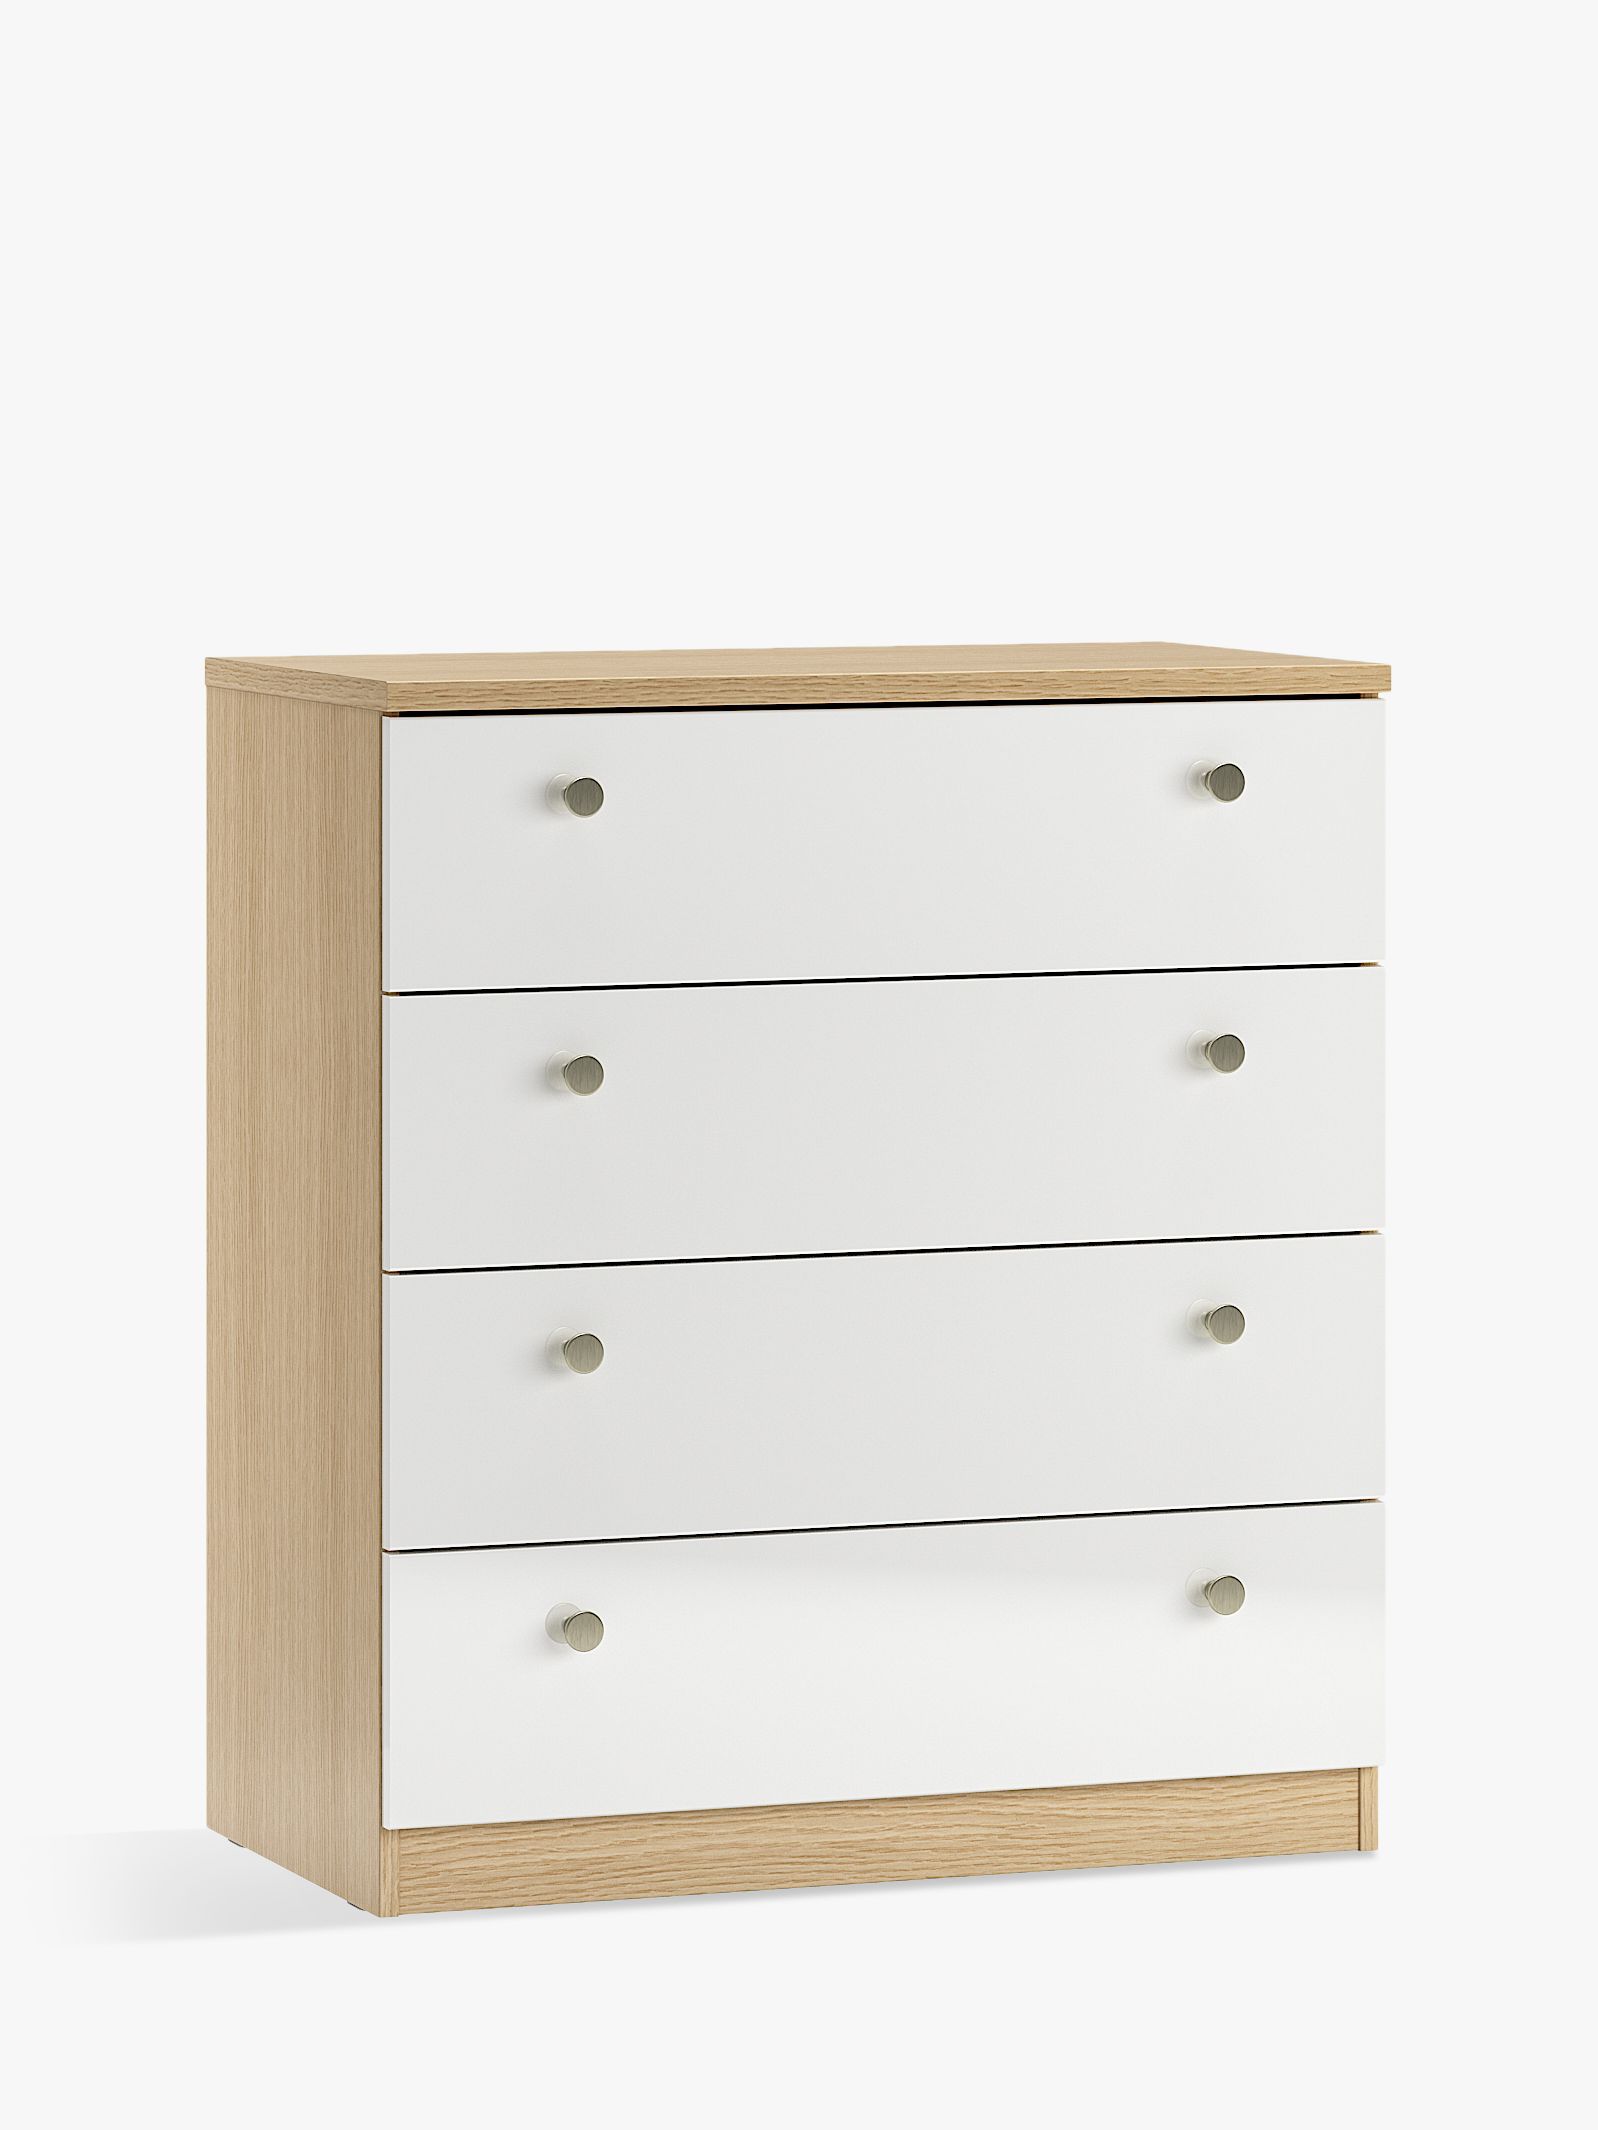 Photo of John lewis anyday mix it wide 4 drawer chest nickel knob handles oak/gloss white